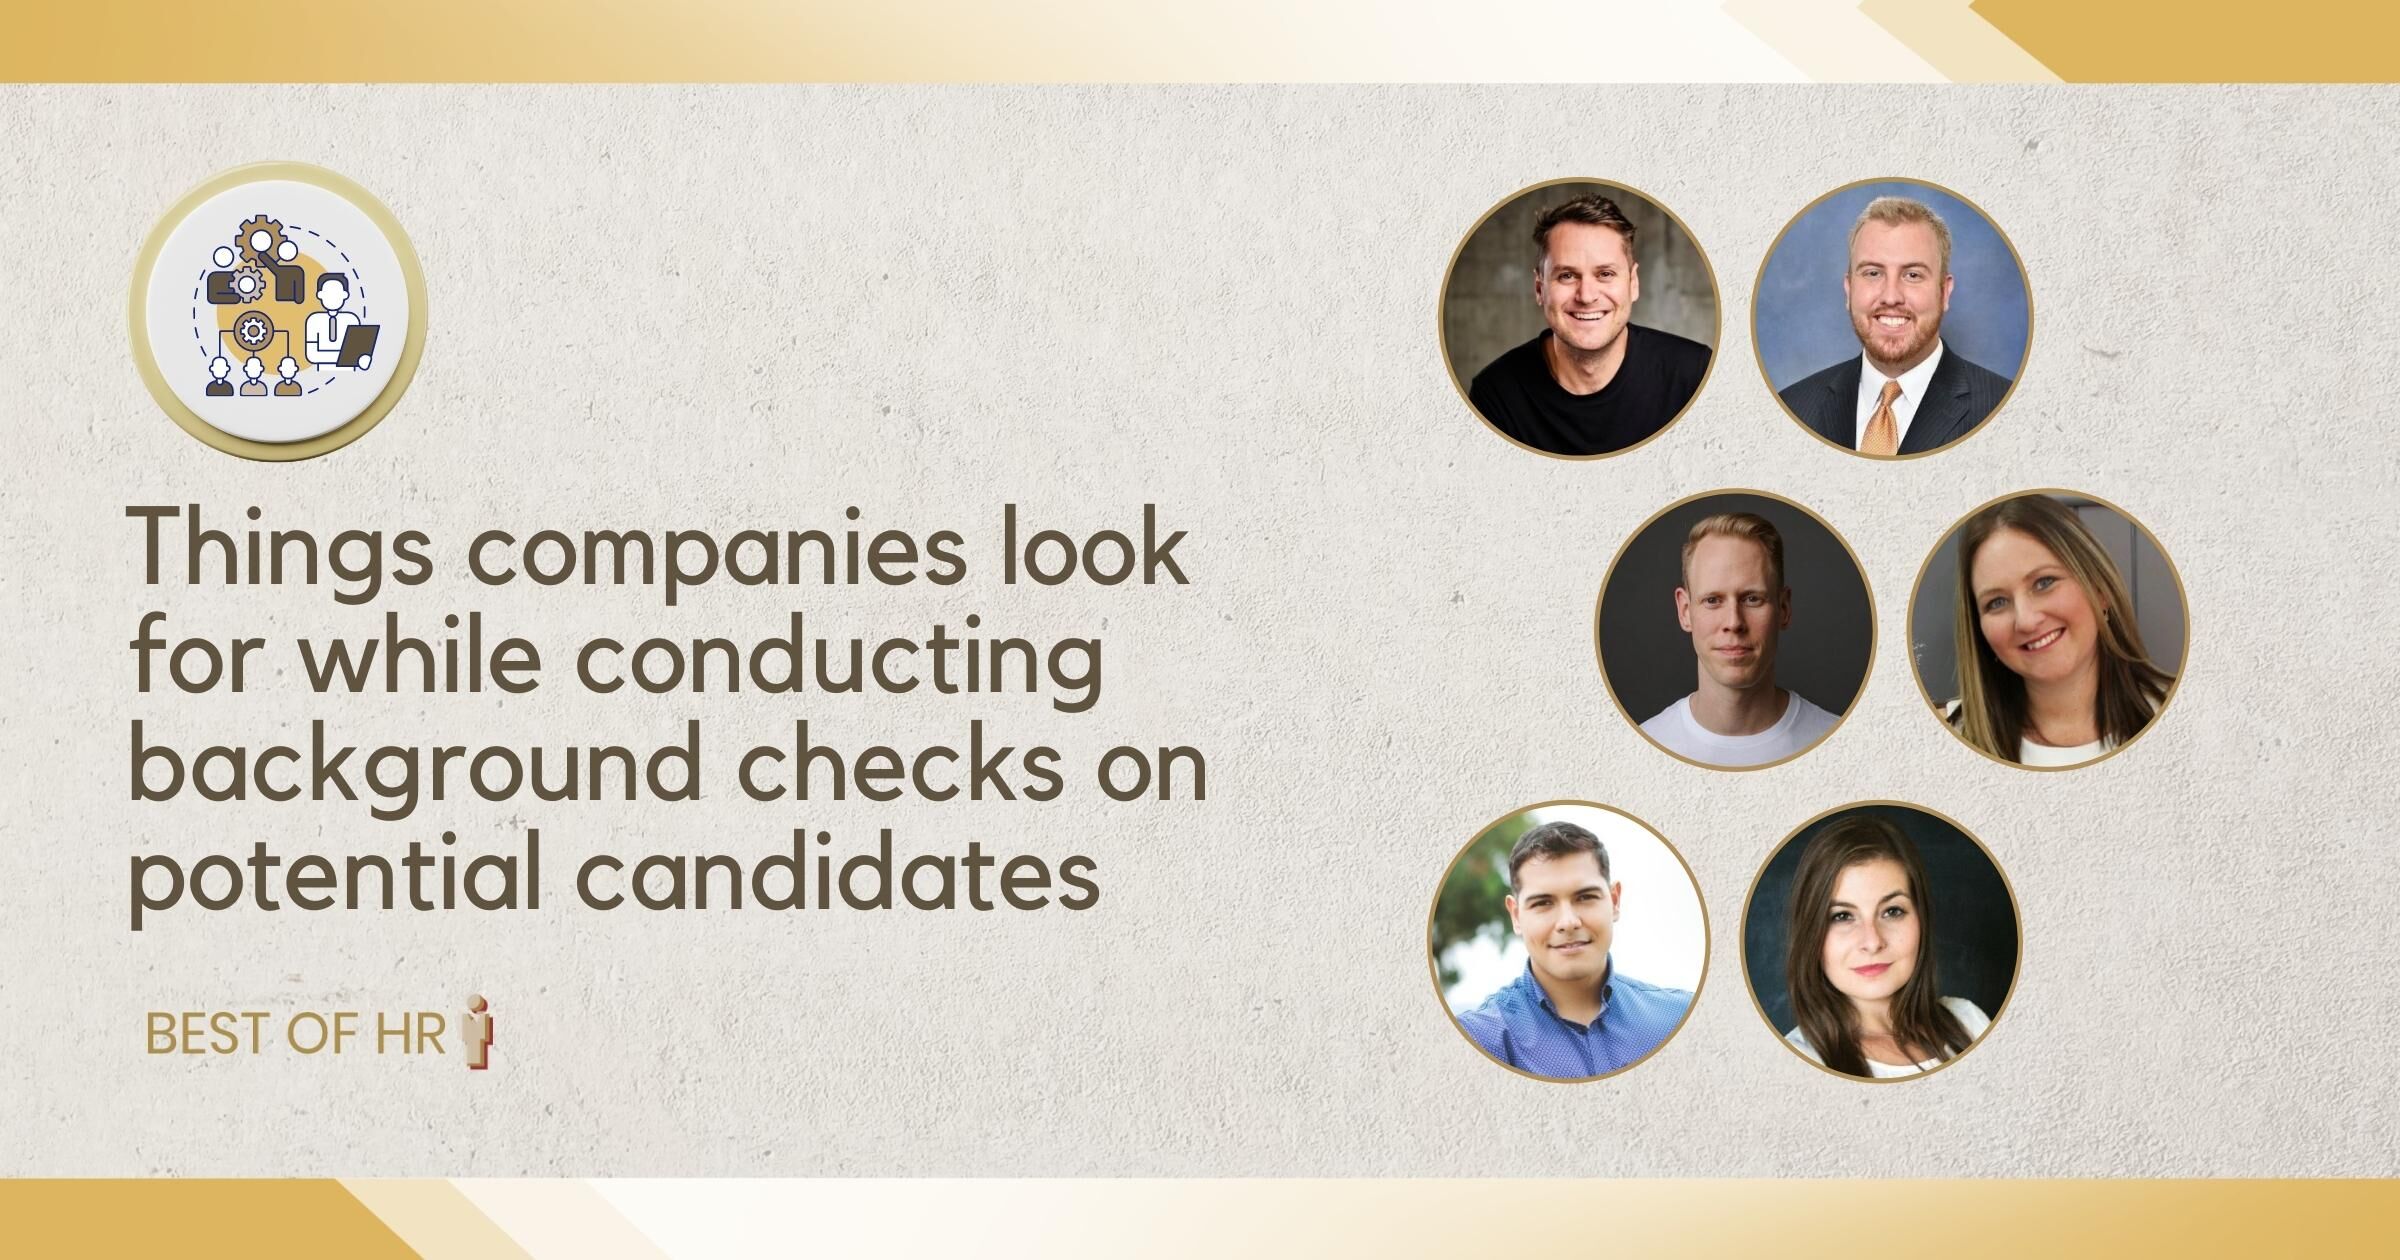 10 things companies look for while conducting background checks